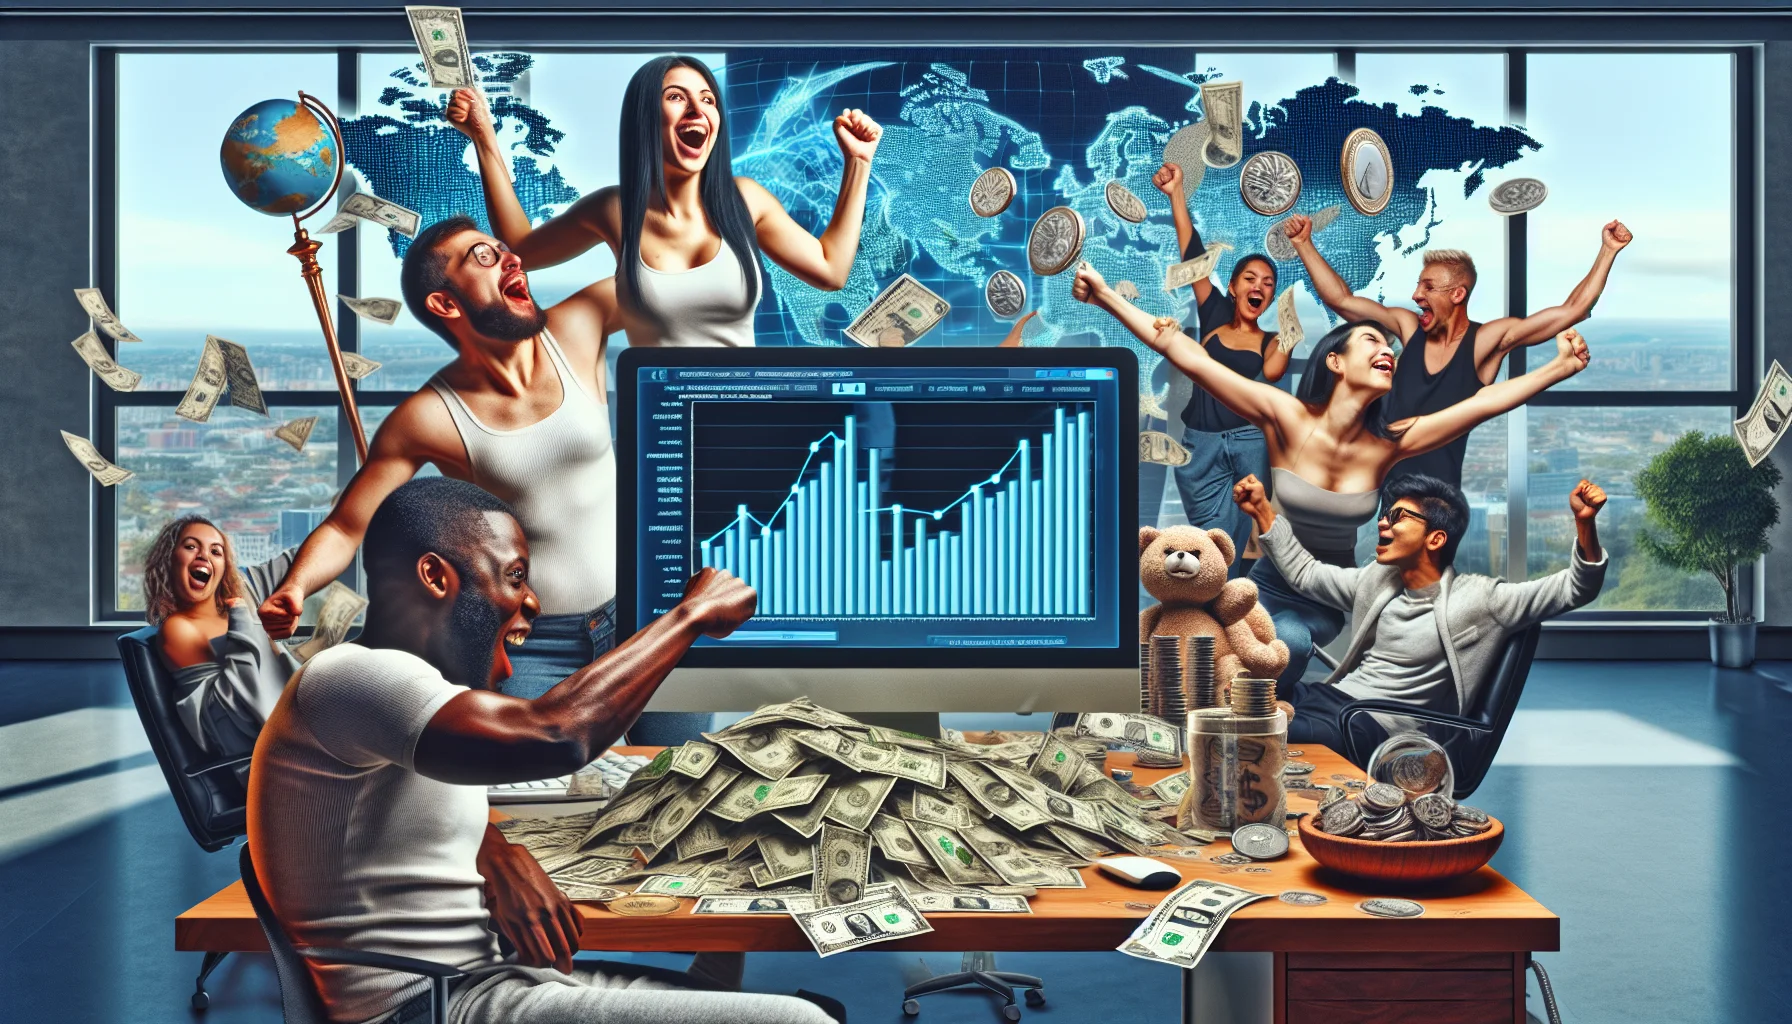 Imagine a humorous scene that demonstrates global affiliate marketers from a variety of backgrounds. In the foreground, a Caucasian female and a Black male are intensely examining a computer screen where a bar chart with rising profits is displayed. On the other side of a modern workspace, a Hispanic male and a South Asian female are animatedly high-fiving, presumably celebrating a successful sale. An extravagant pile of dollar bills and coins, indicative of online earnings, is sprawled on their desk. In the background, a virtual world map reflects their associate connections around the globe.